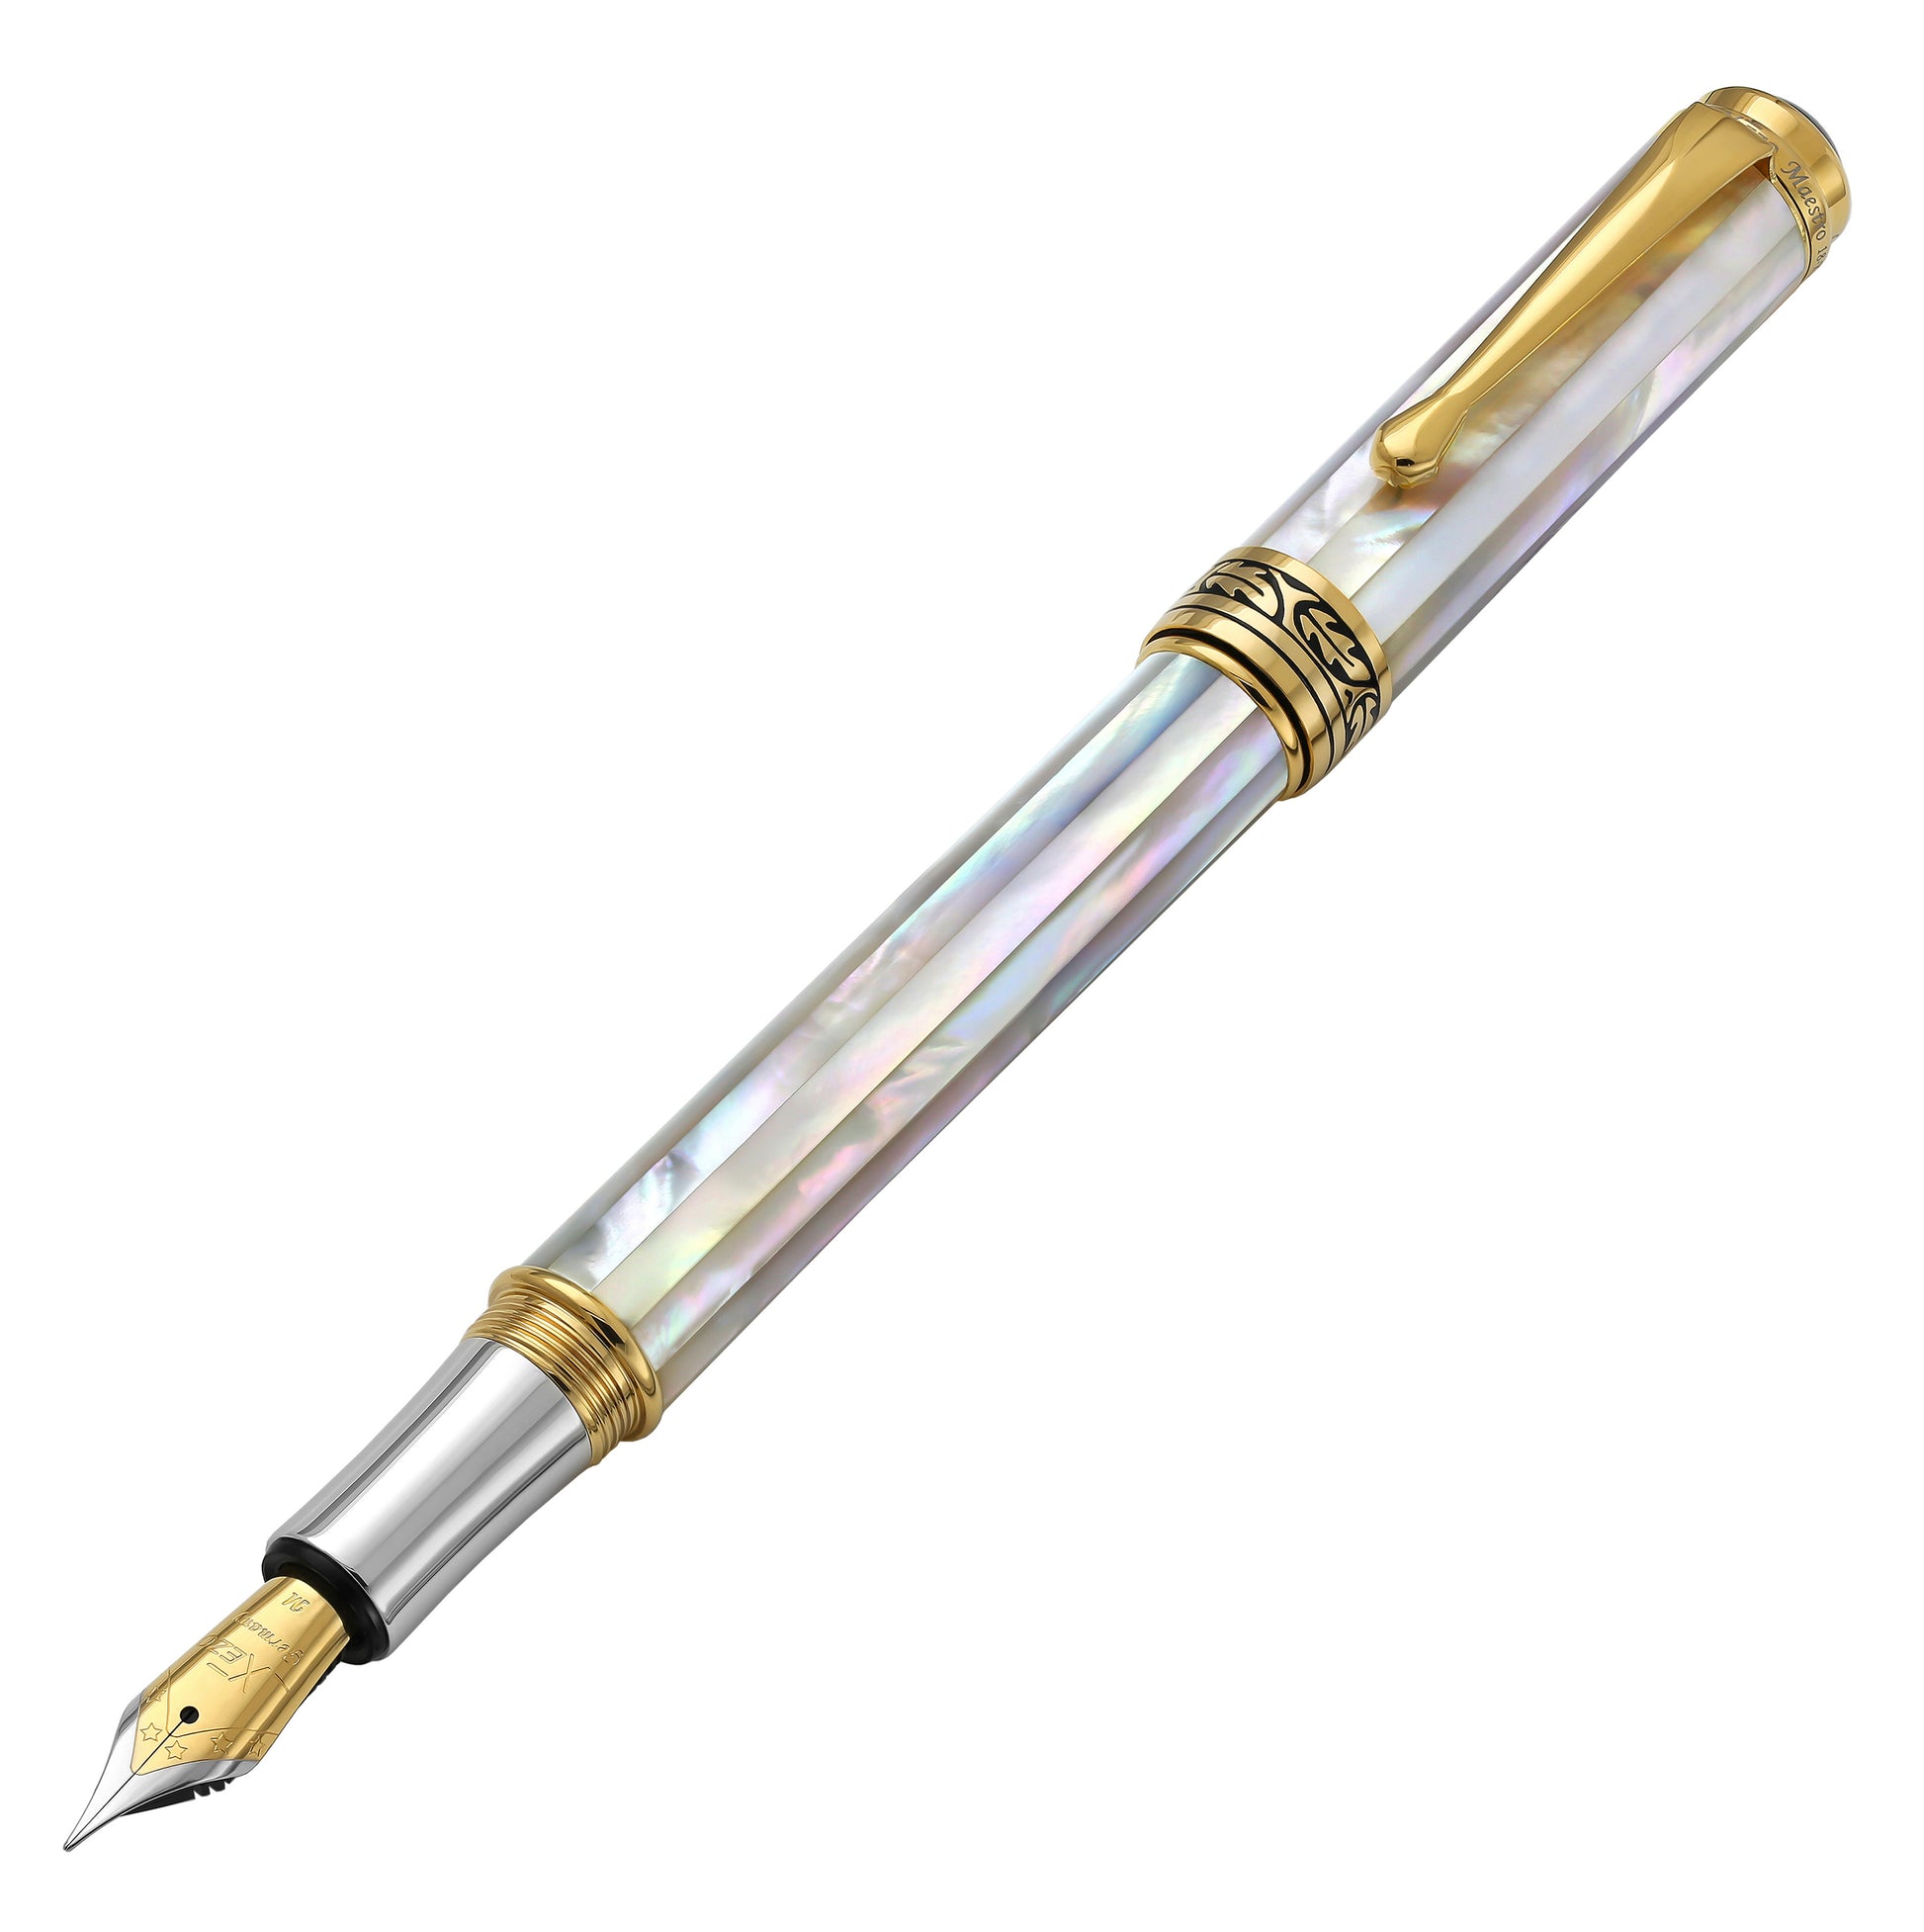 Angled front view of the Maestro White MOP FM fountain pen